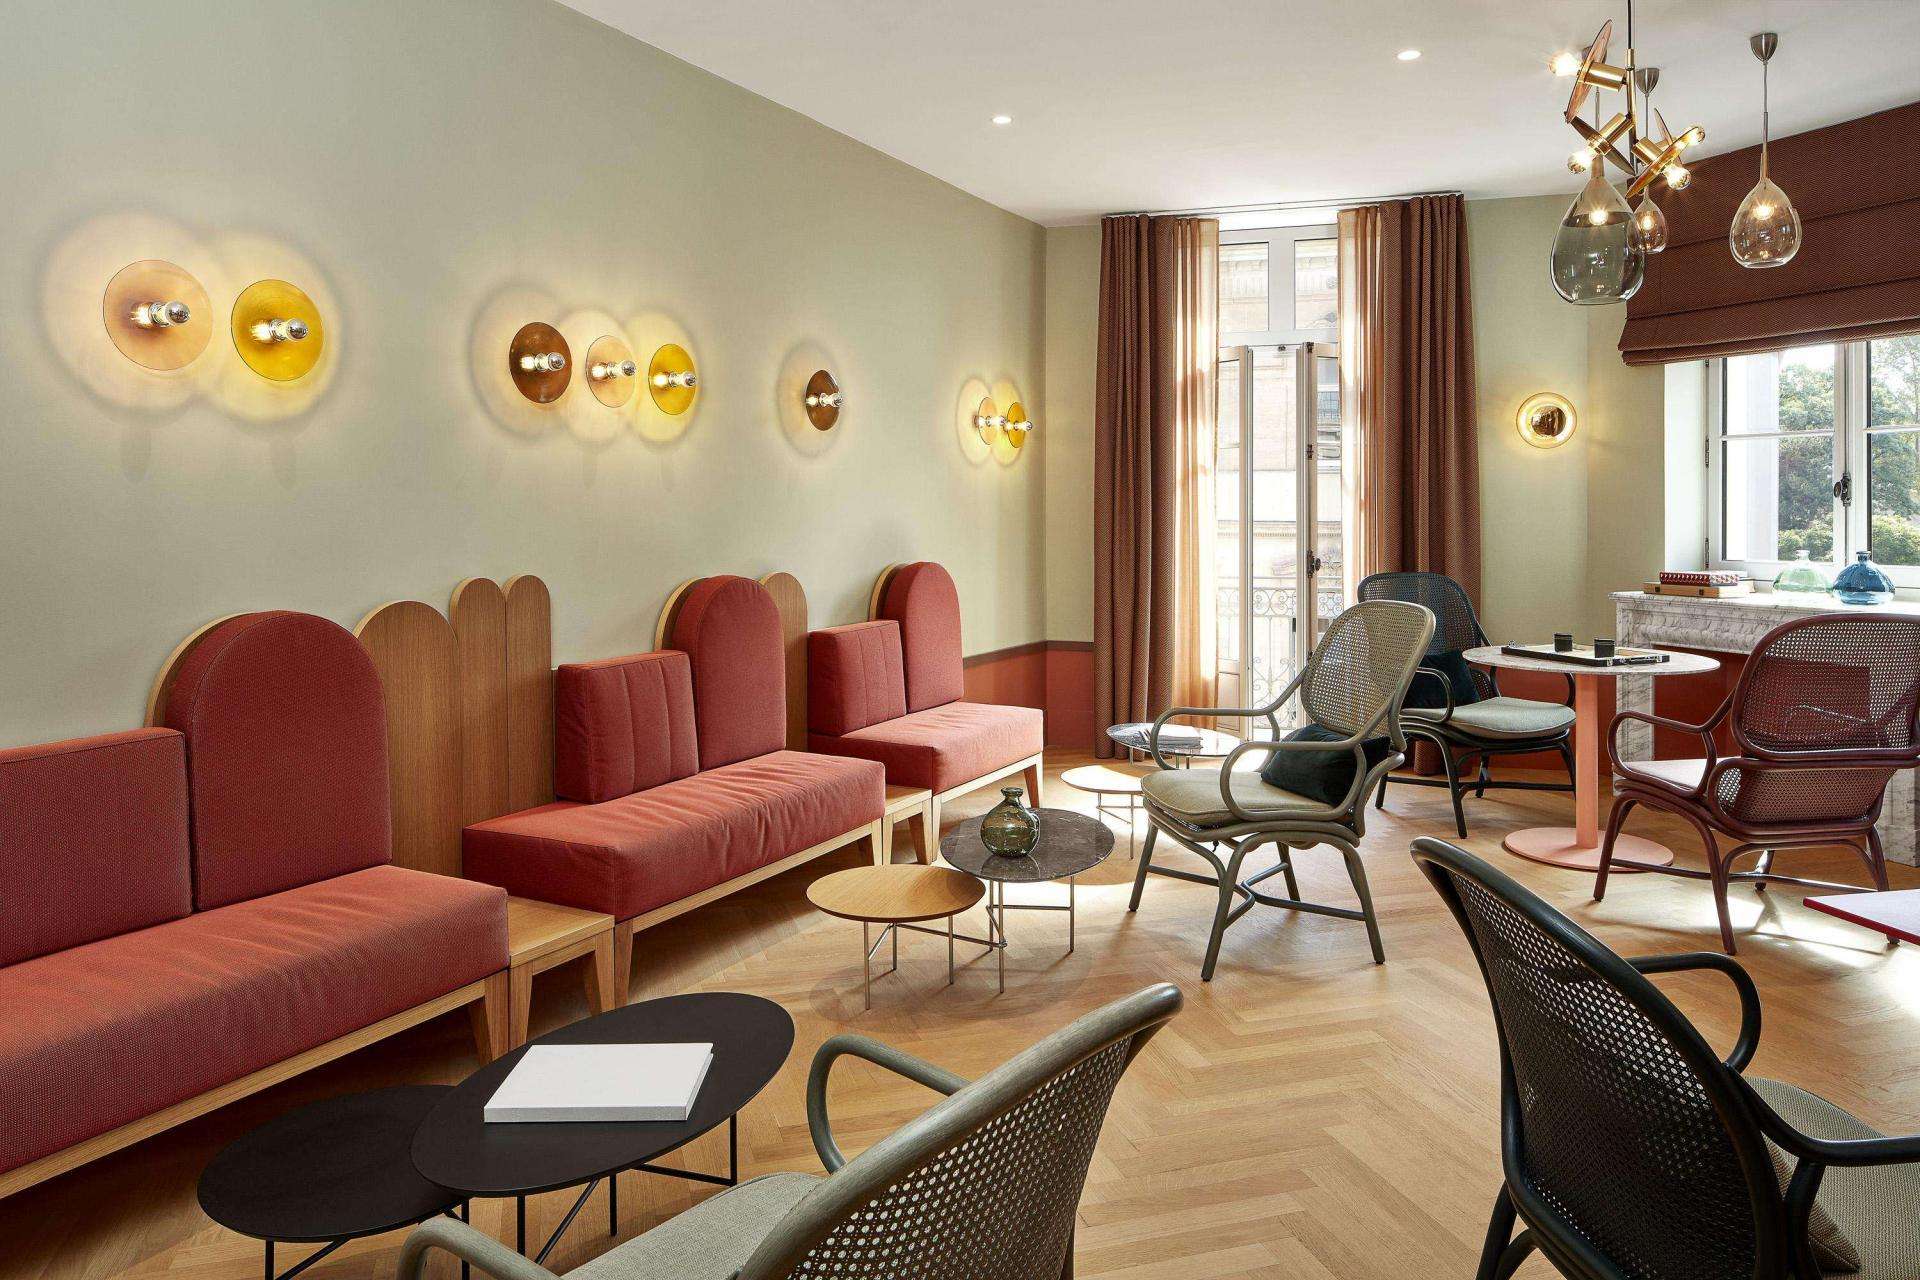 The meeting rooms of the Hotel De Cambis
Come and discover the meeting rooms of the Hotel De Cambis
in the heart of the ramparts of Avignon for your next meetings.